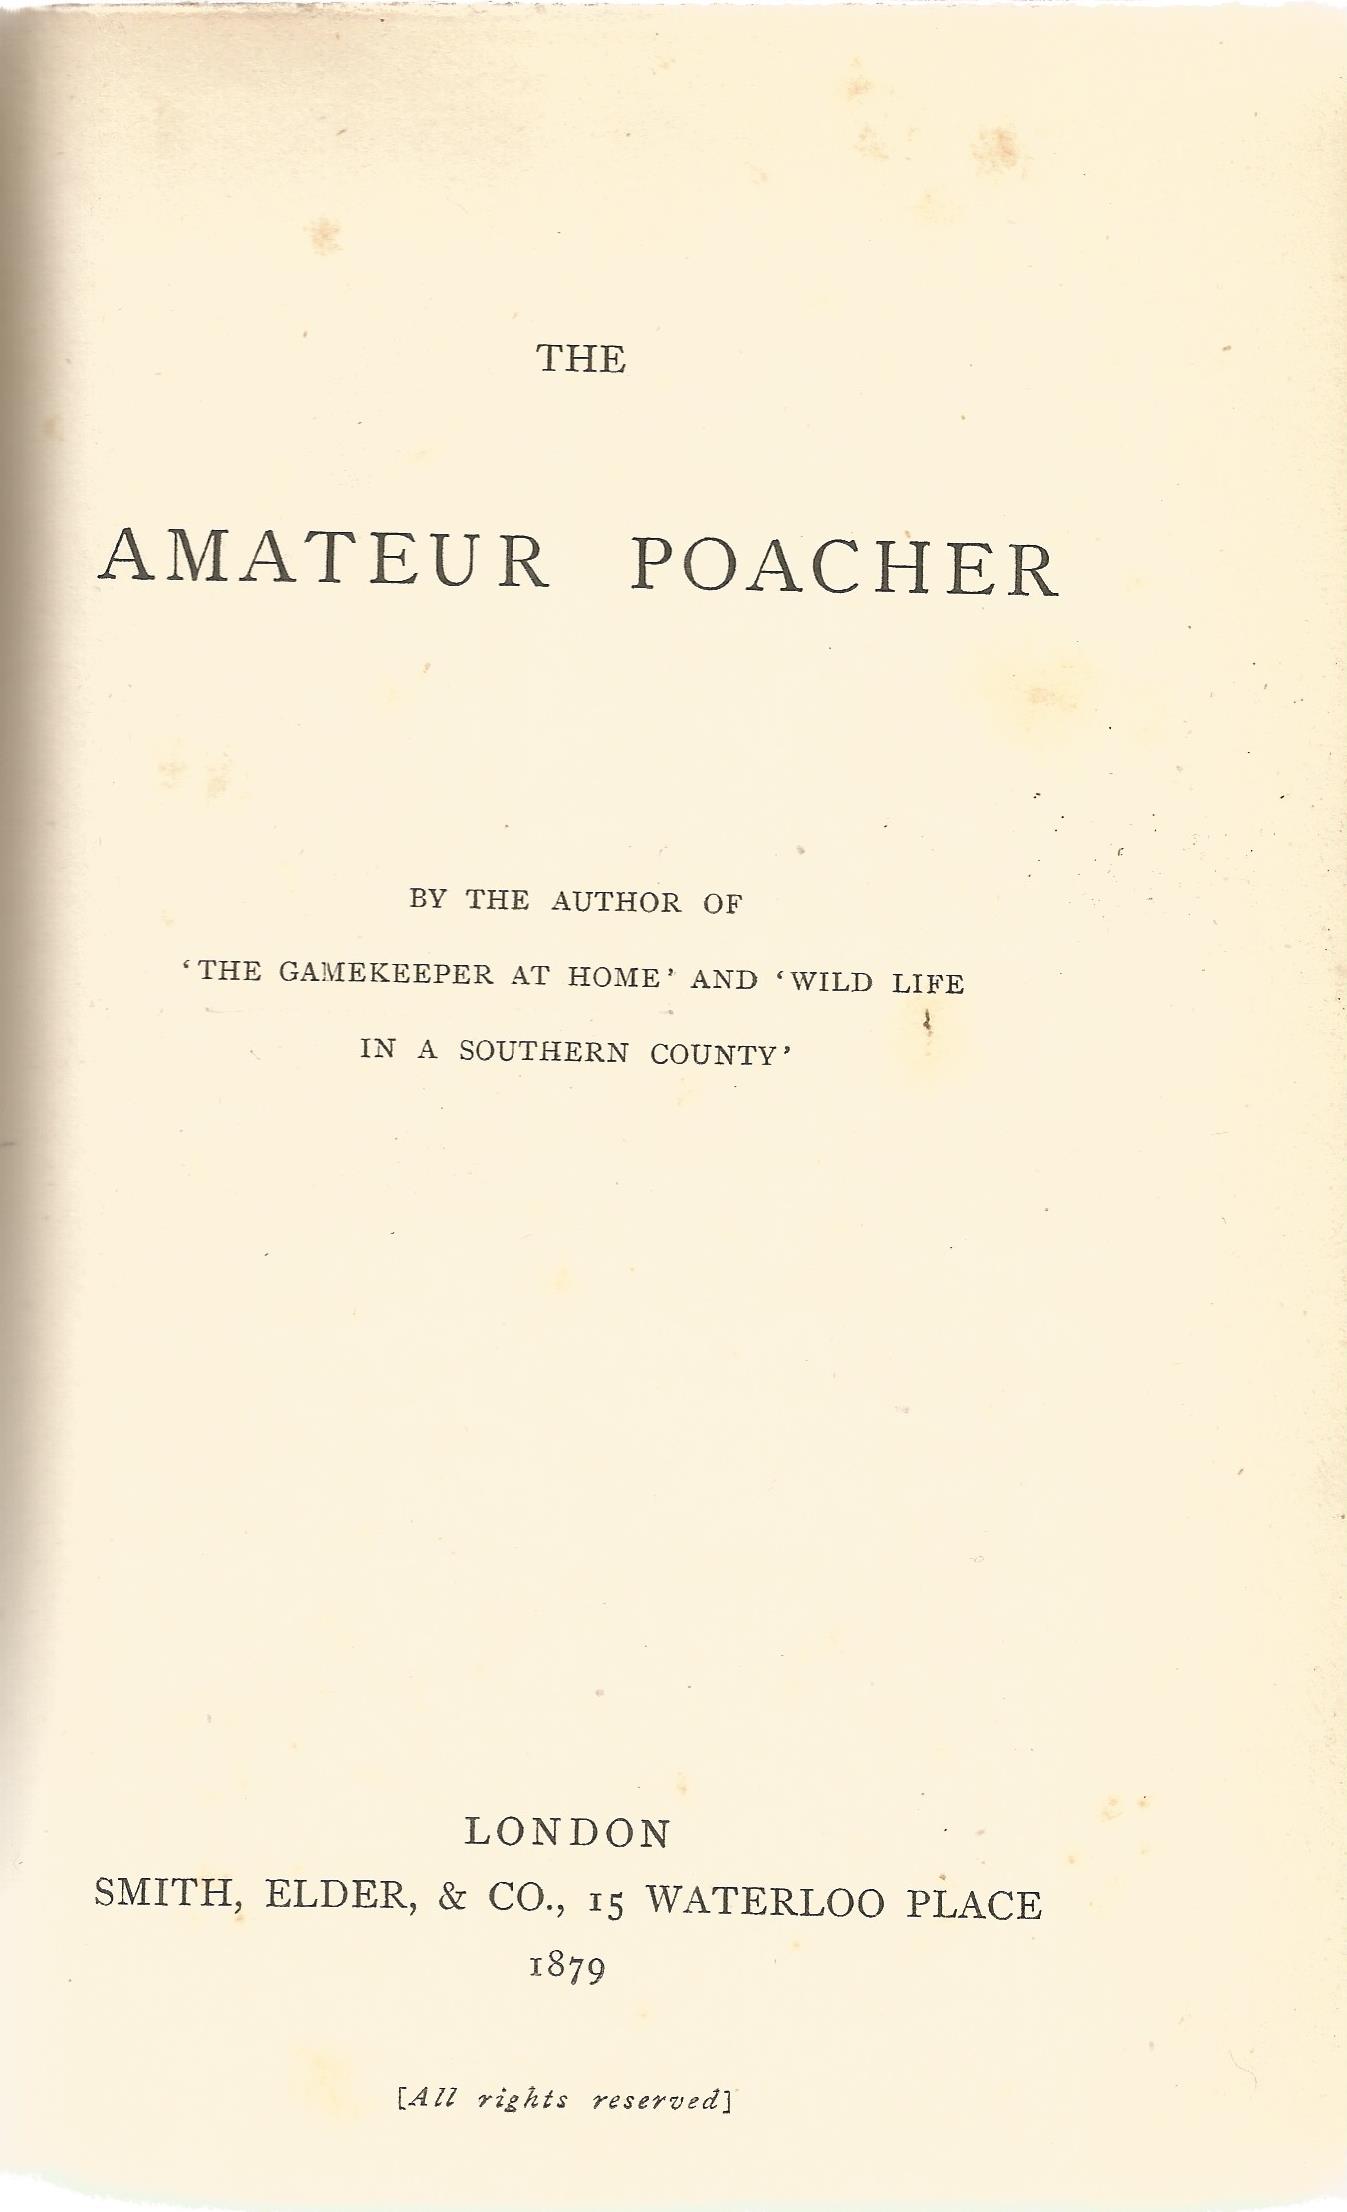 The Amateur Poacher by Anonymous Author Hardback Book 1879 published by Smith, Elder, and Co some - Image 2 of 2